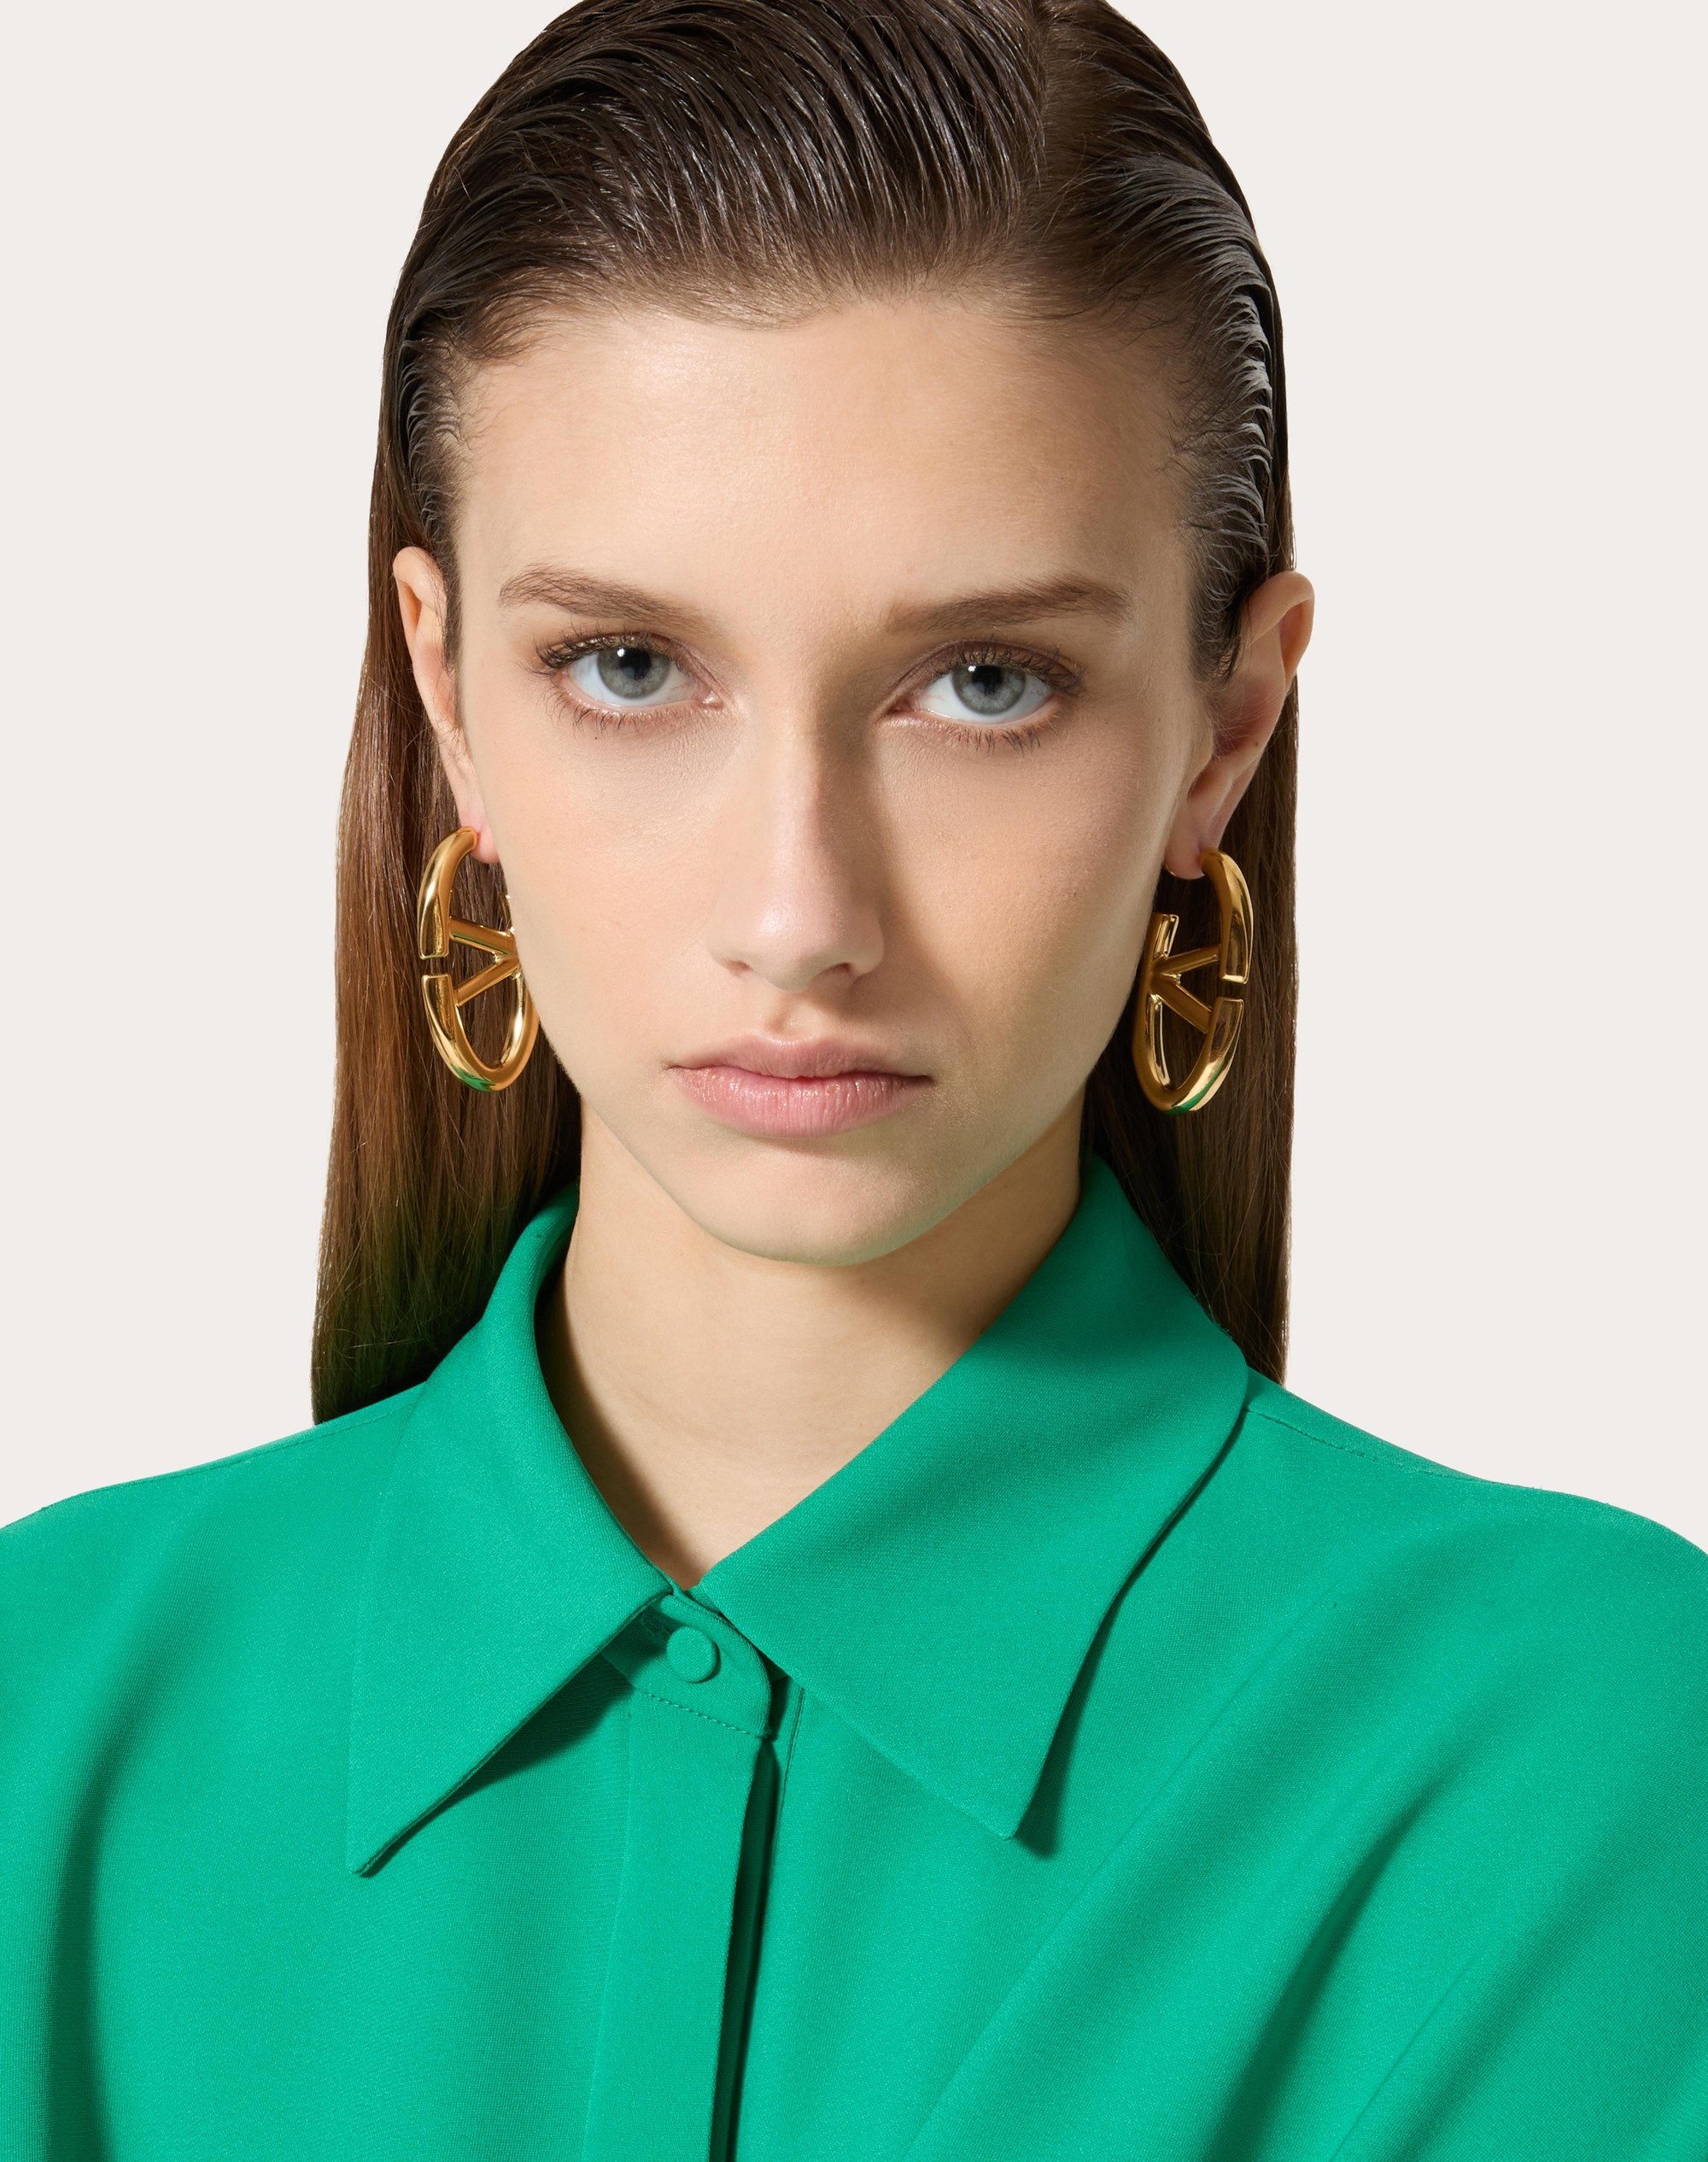 VLOGO THE BOLD EDITION METAL EARRINGS - 5